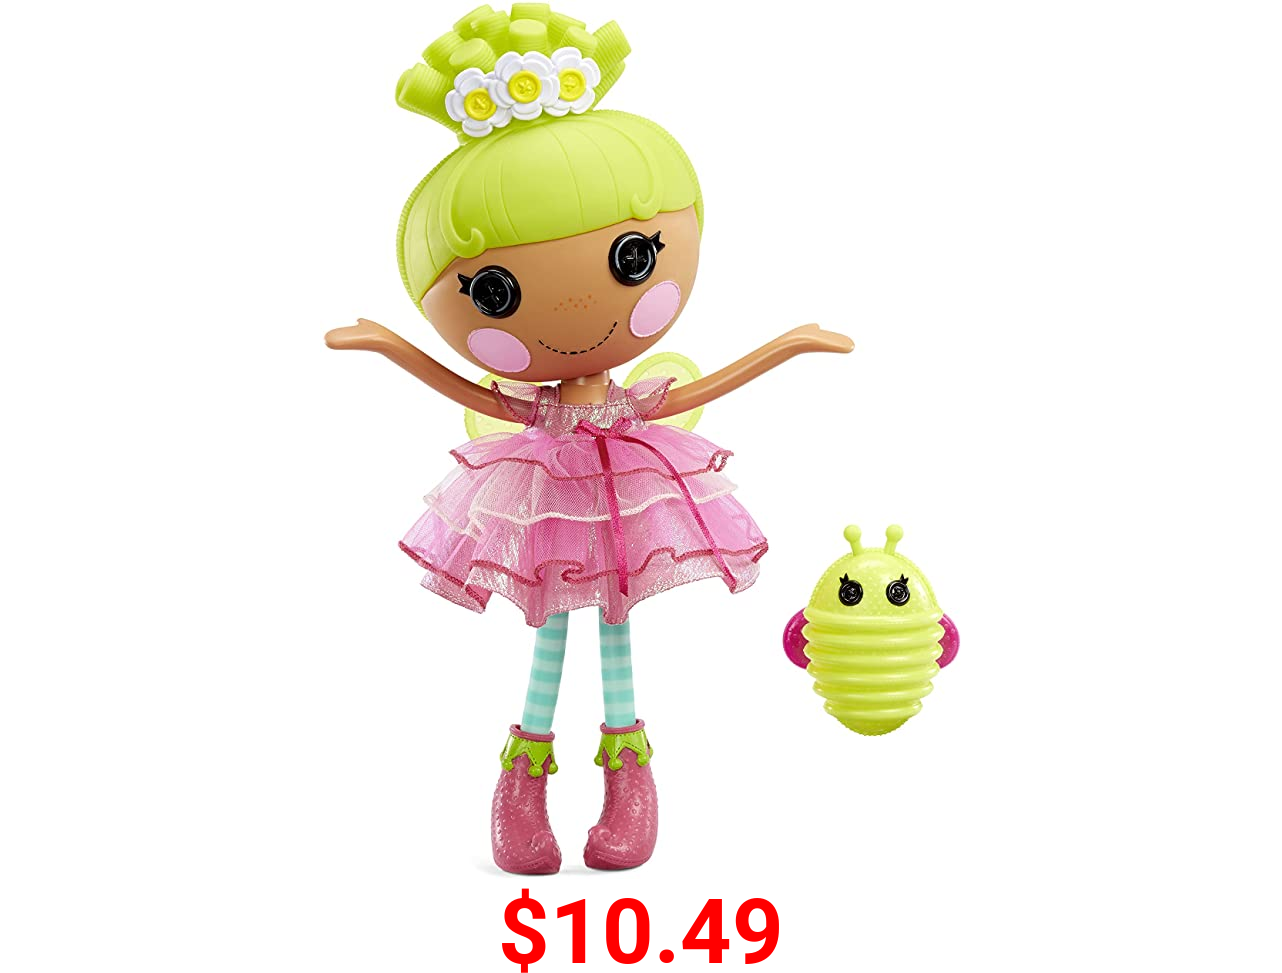 Lalaloopsy Doll- Pix E. Flutters & Pet Firefly, 13" Fairy Doll with Florescent Yellow Hair, Pink Outfit & Accessories, Reusable House Playset- Gifts for Kids, Toys for Girls Ages 3 4 5+ to 103 Years